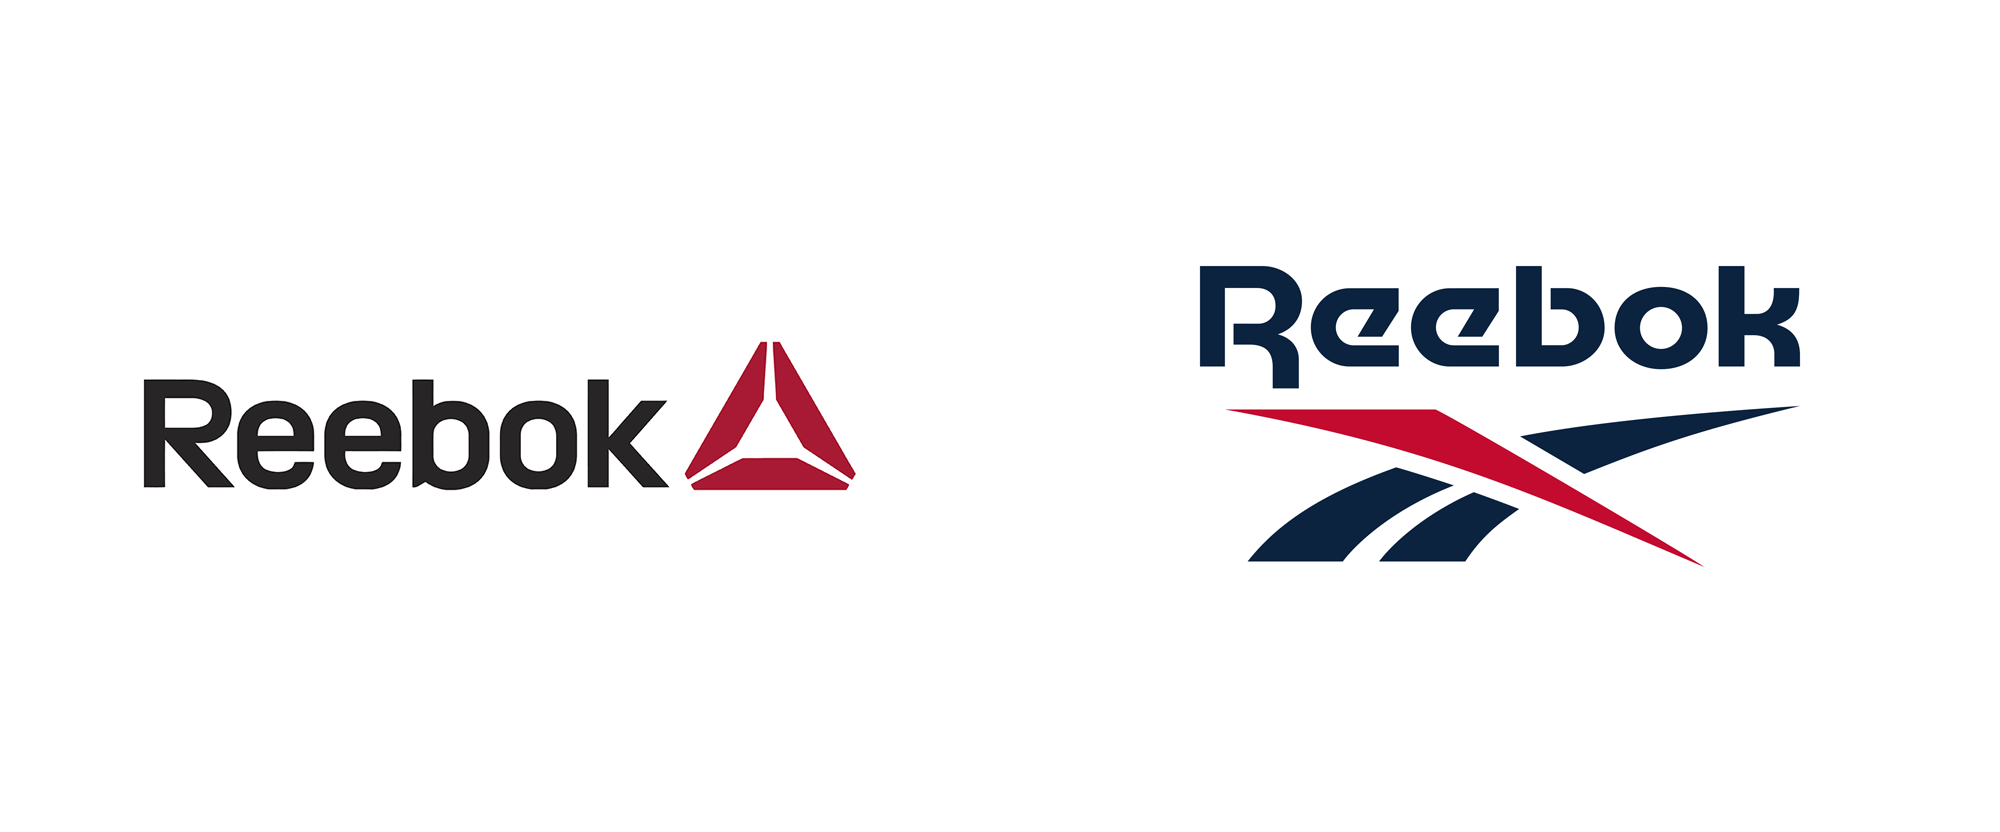 Brand New New Logo And Identity For Reebok Done In House With